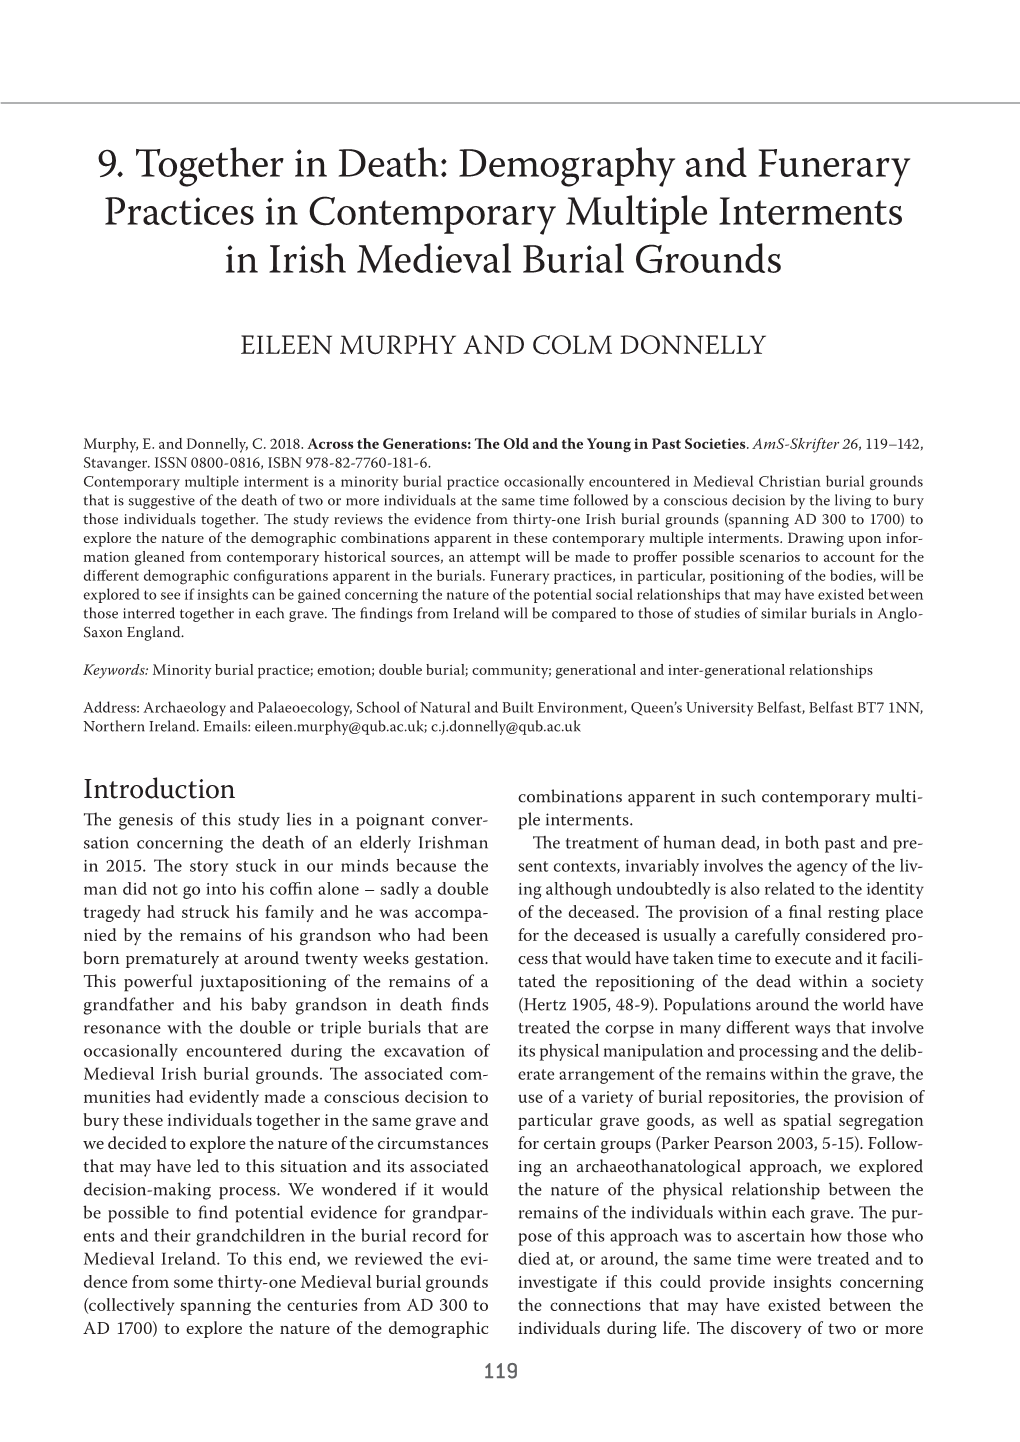 Demography and Funerary Practices in Contemporary Multiple Interments in Irish Medieval Burial Grounds